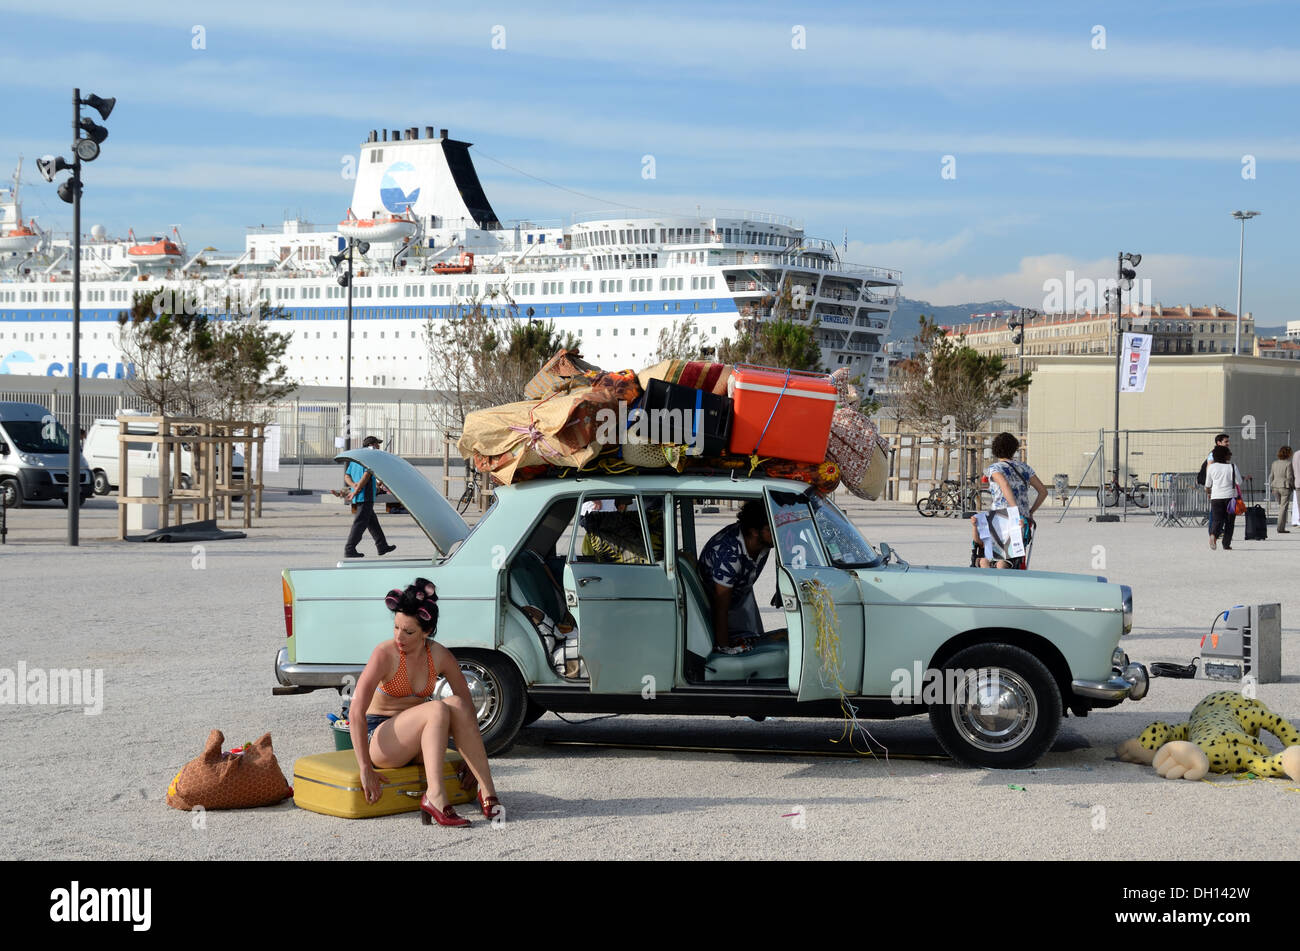 Female Tourist Packing Vintage Peugeot 204 Car, with Luggage & Bags on Overloaded Roof Rack, on the Waterfront with Ferry Boat Marseille France Stock Photo